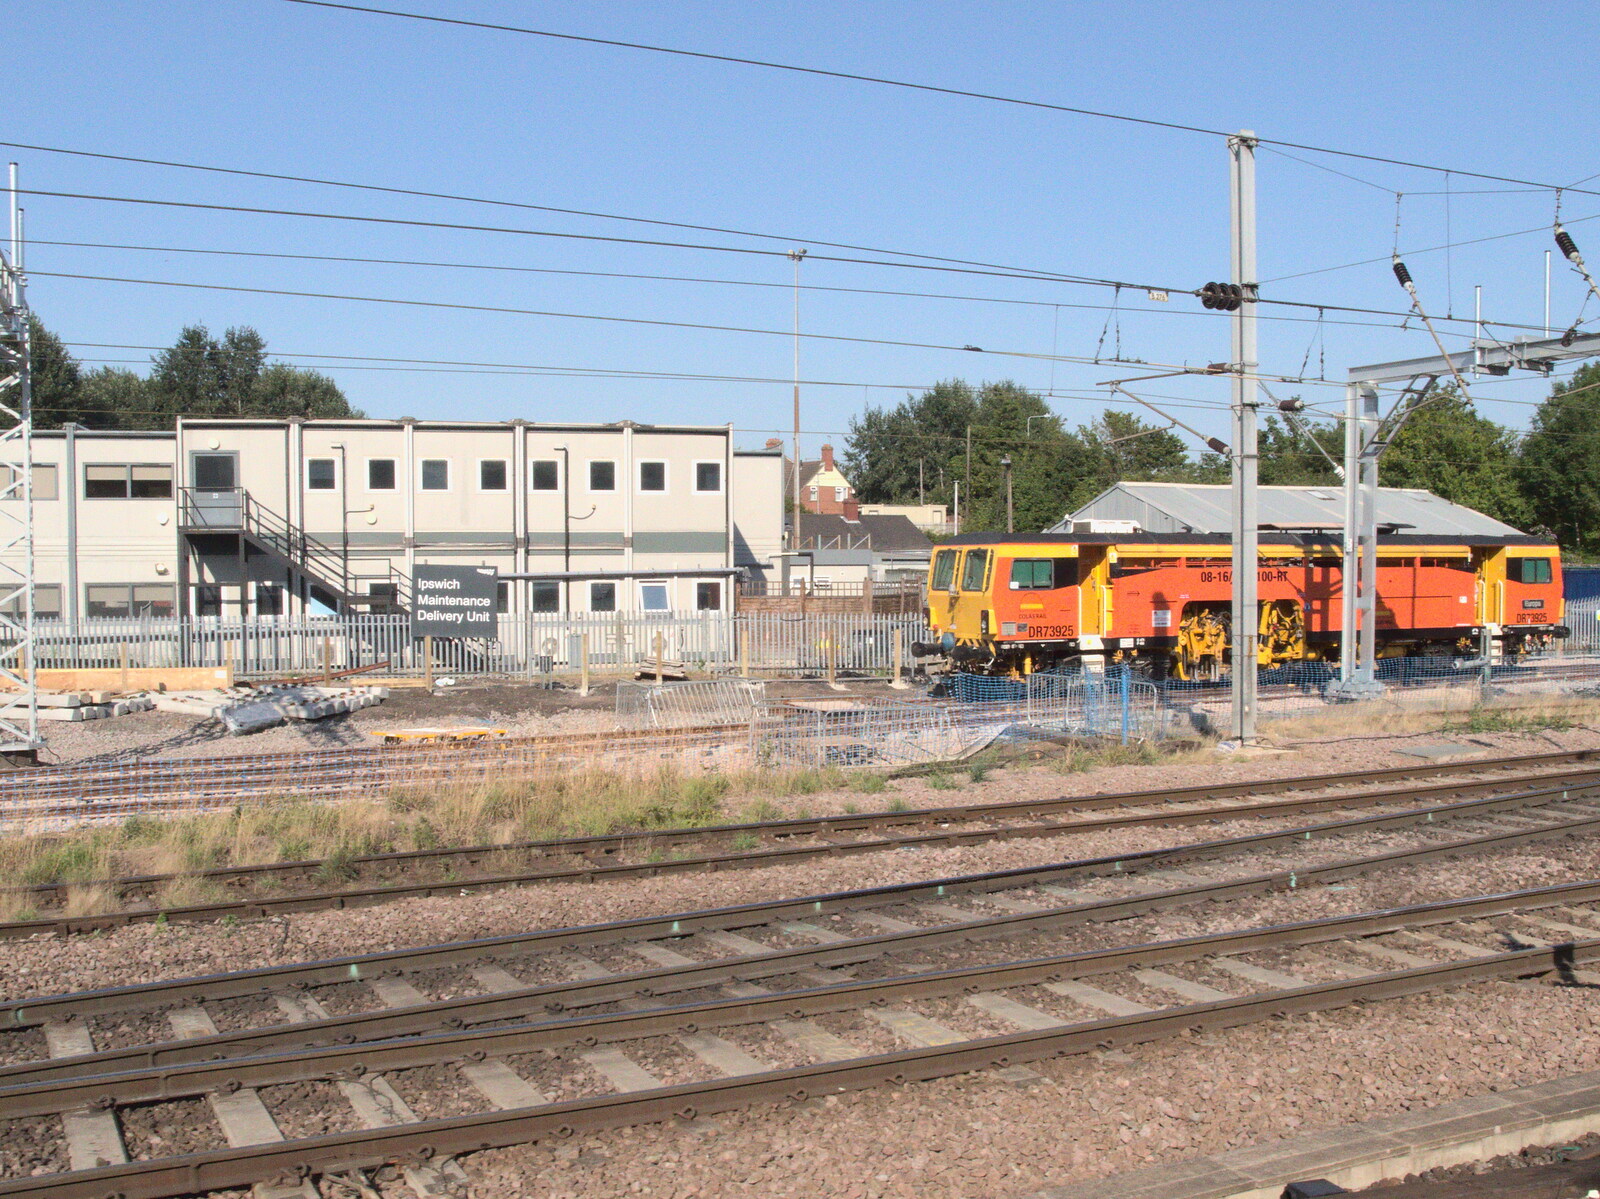 A track-measuring train at Ipswich from A Week on the Rails, Stratford and Liverpool Street, London - 23rd July